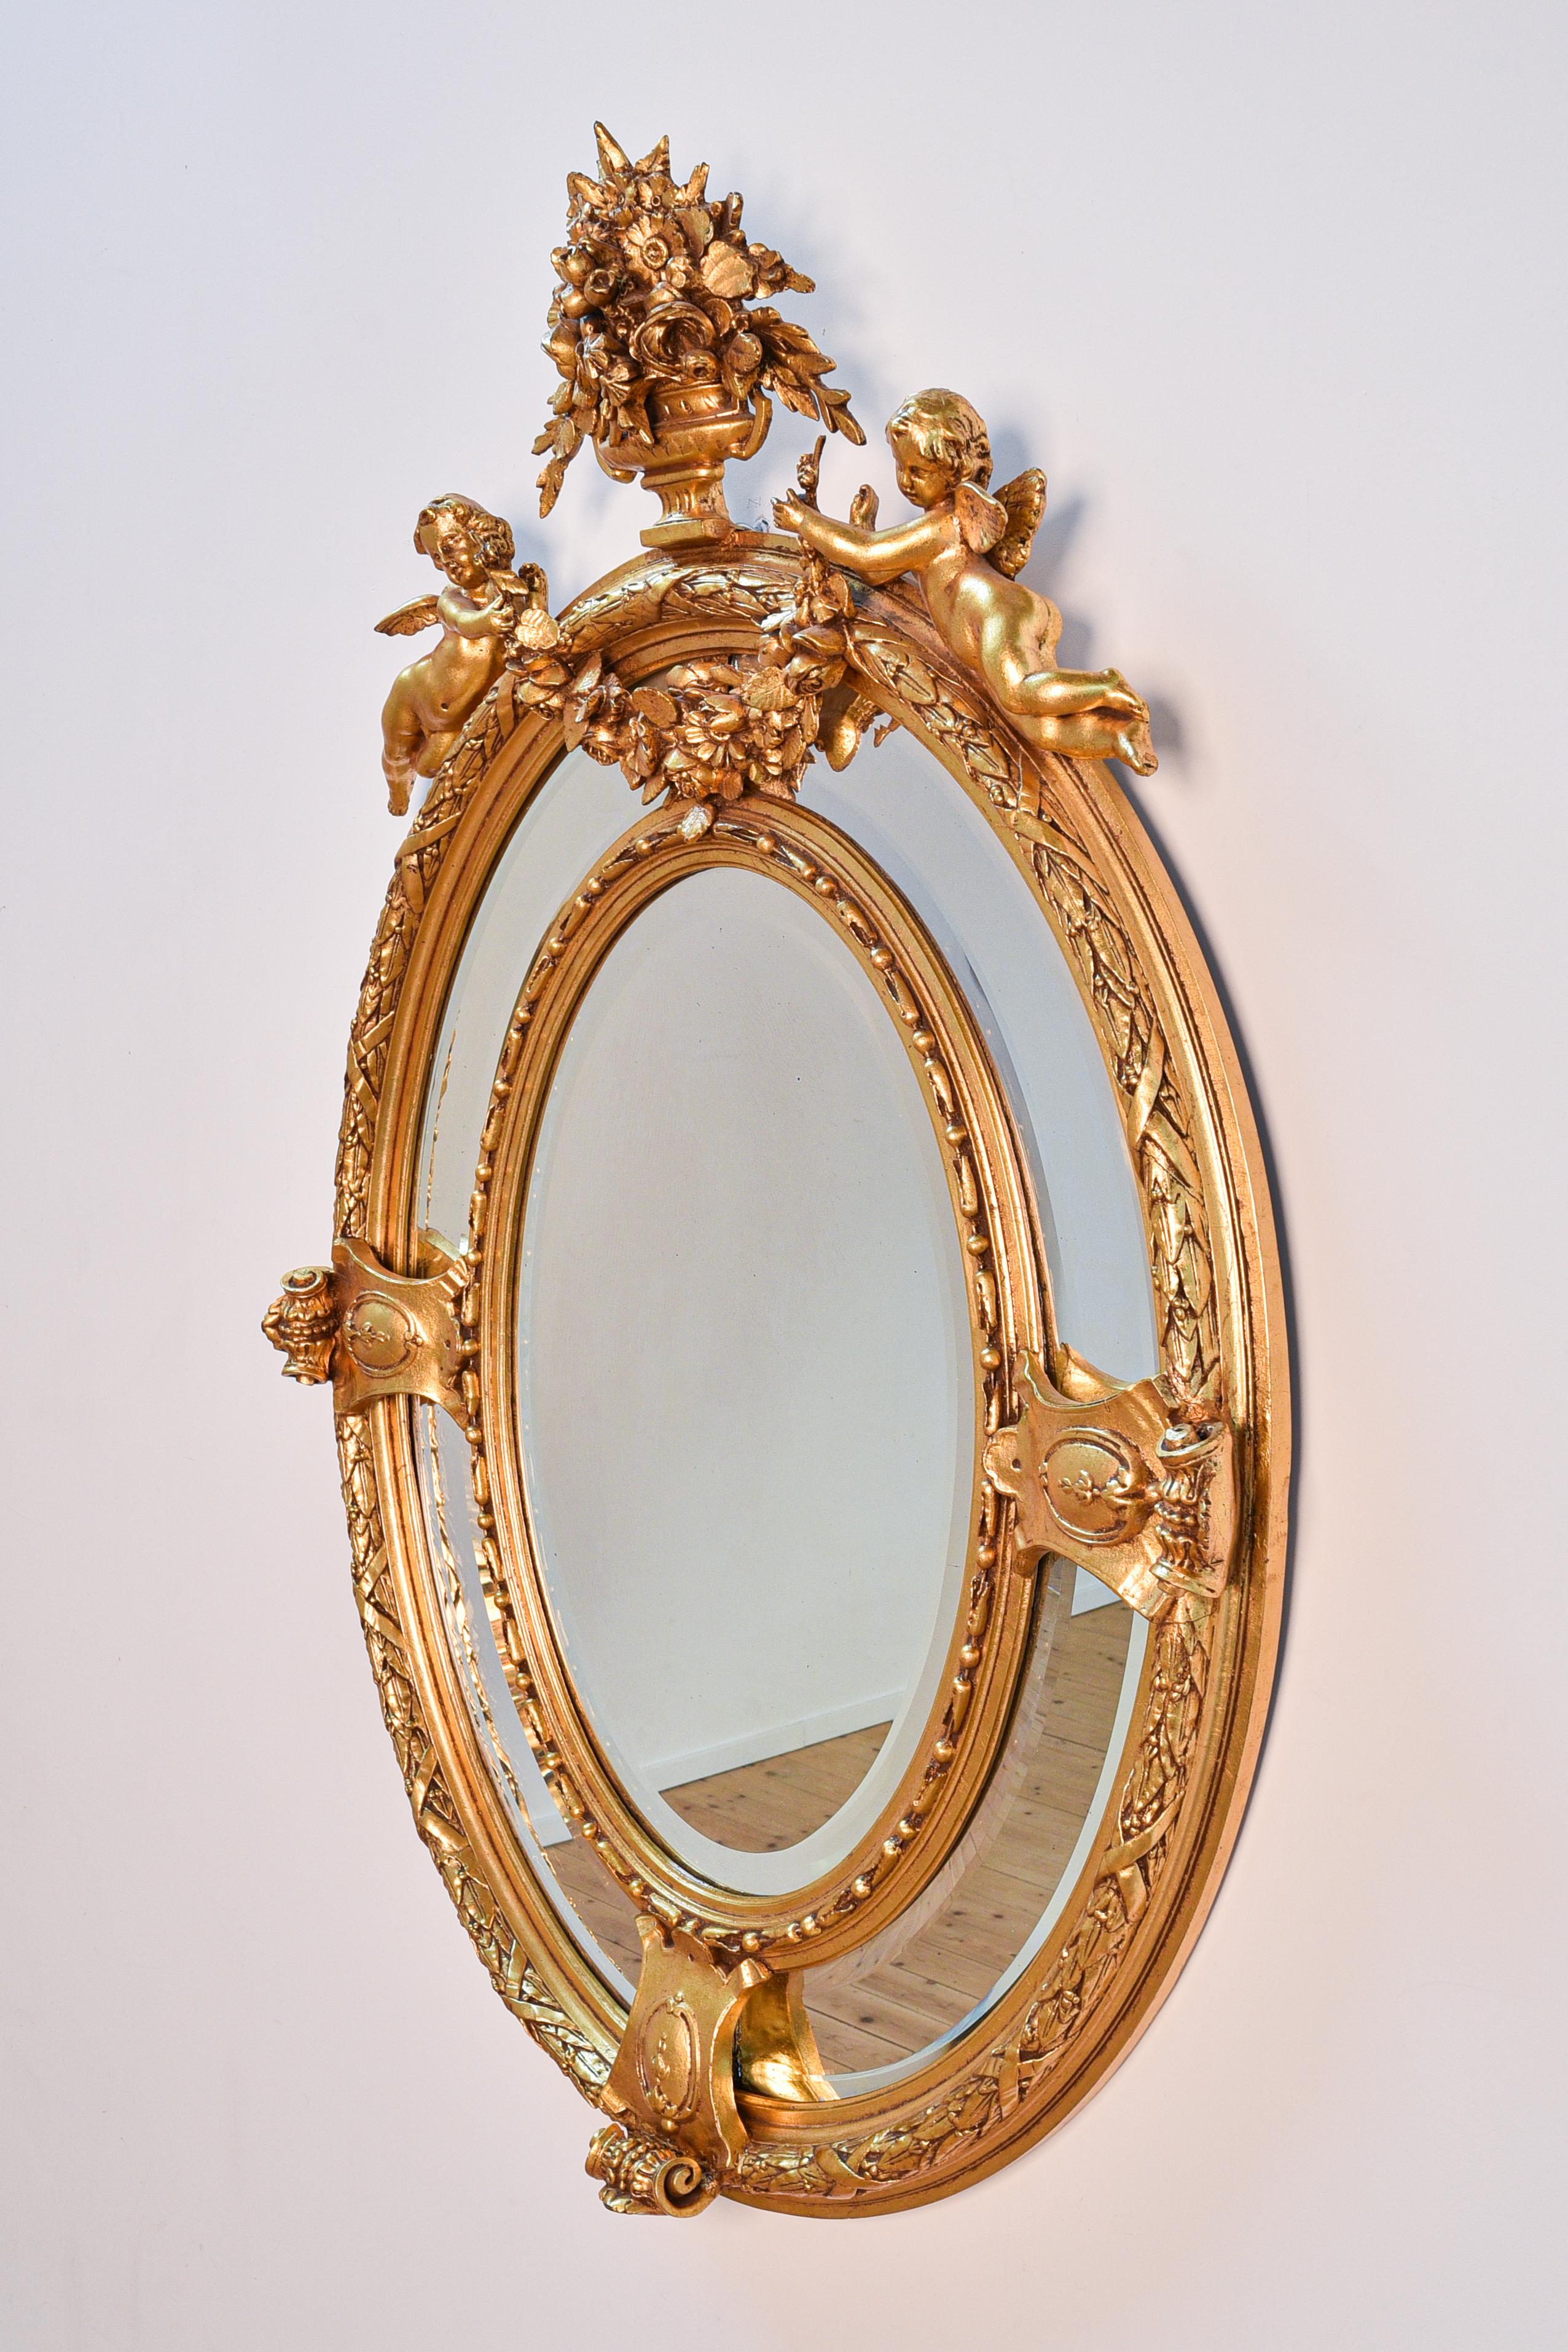 Late 19th century Italian antique baroque girandole mirror with wooden frame, decorated with angels and floral elements, cut glass. 